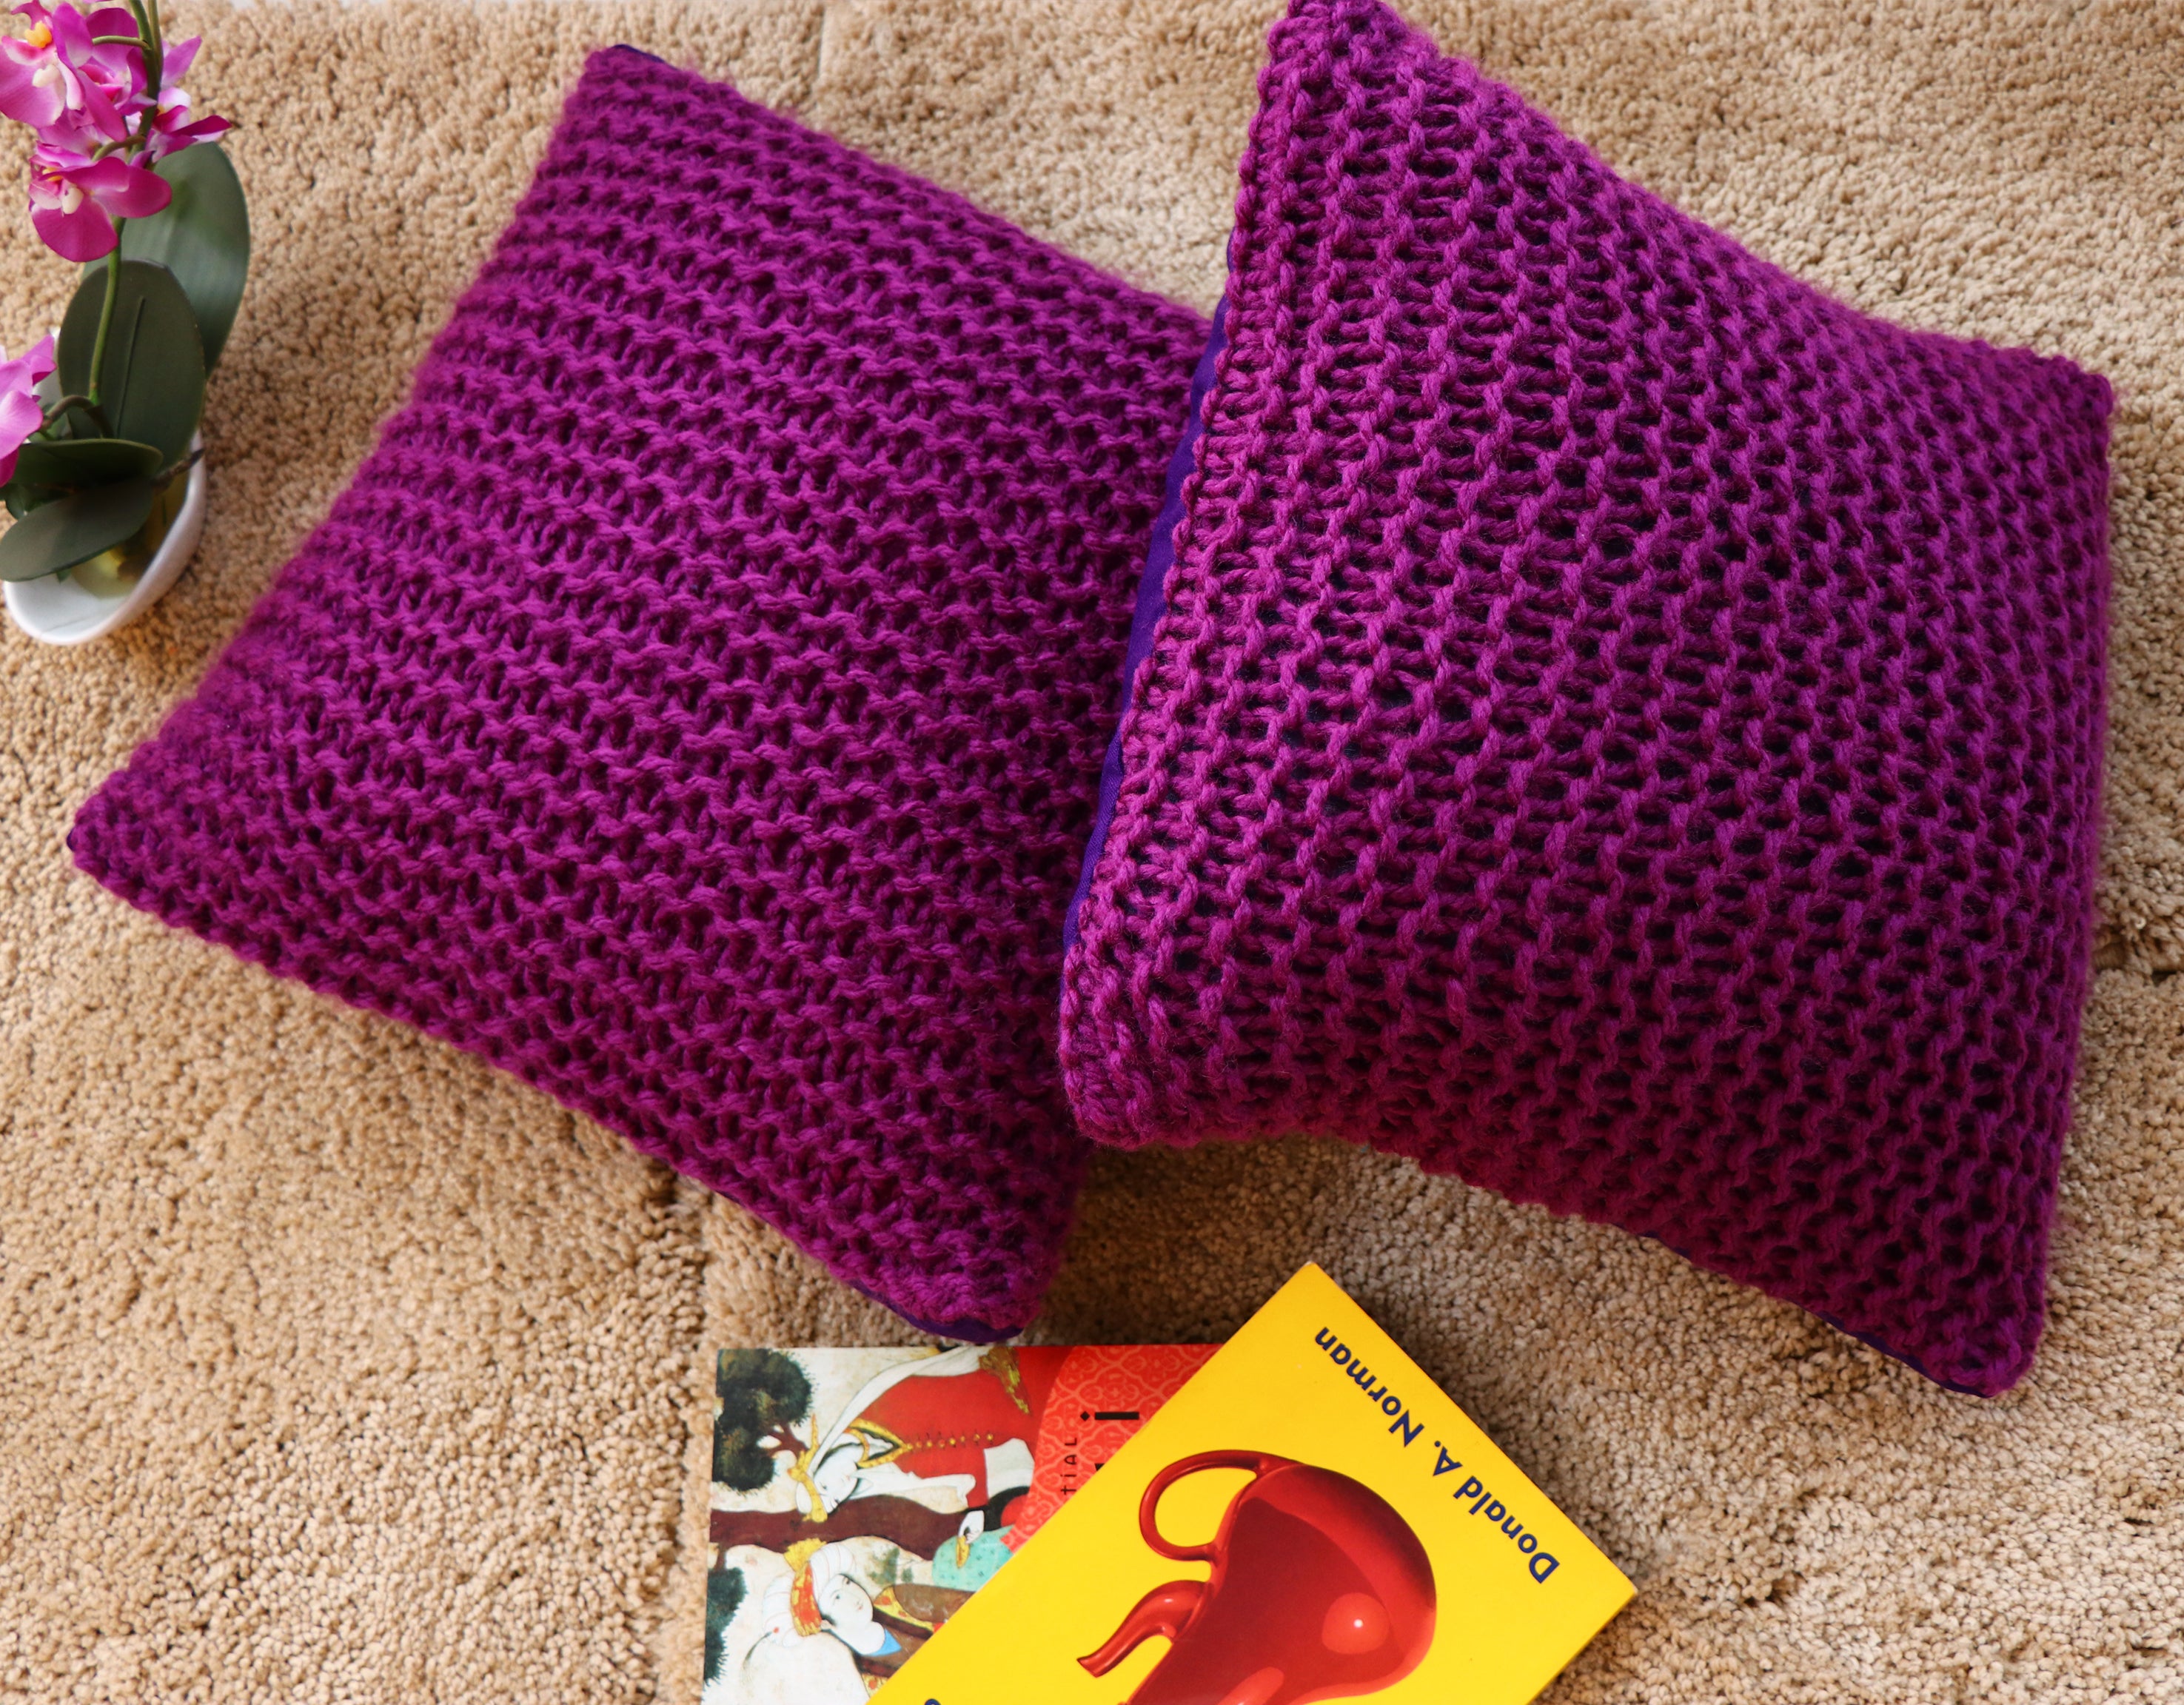 Purple hand knitted cushions by artisans of India for winter season